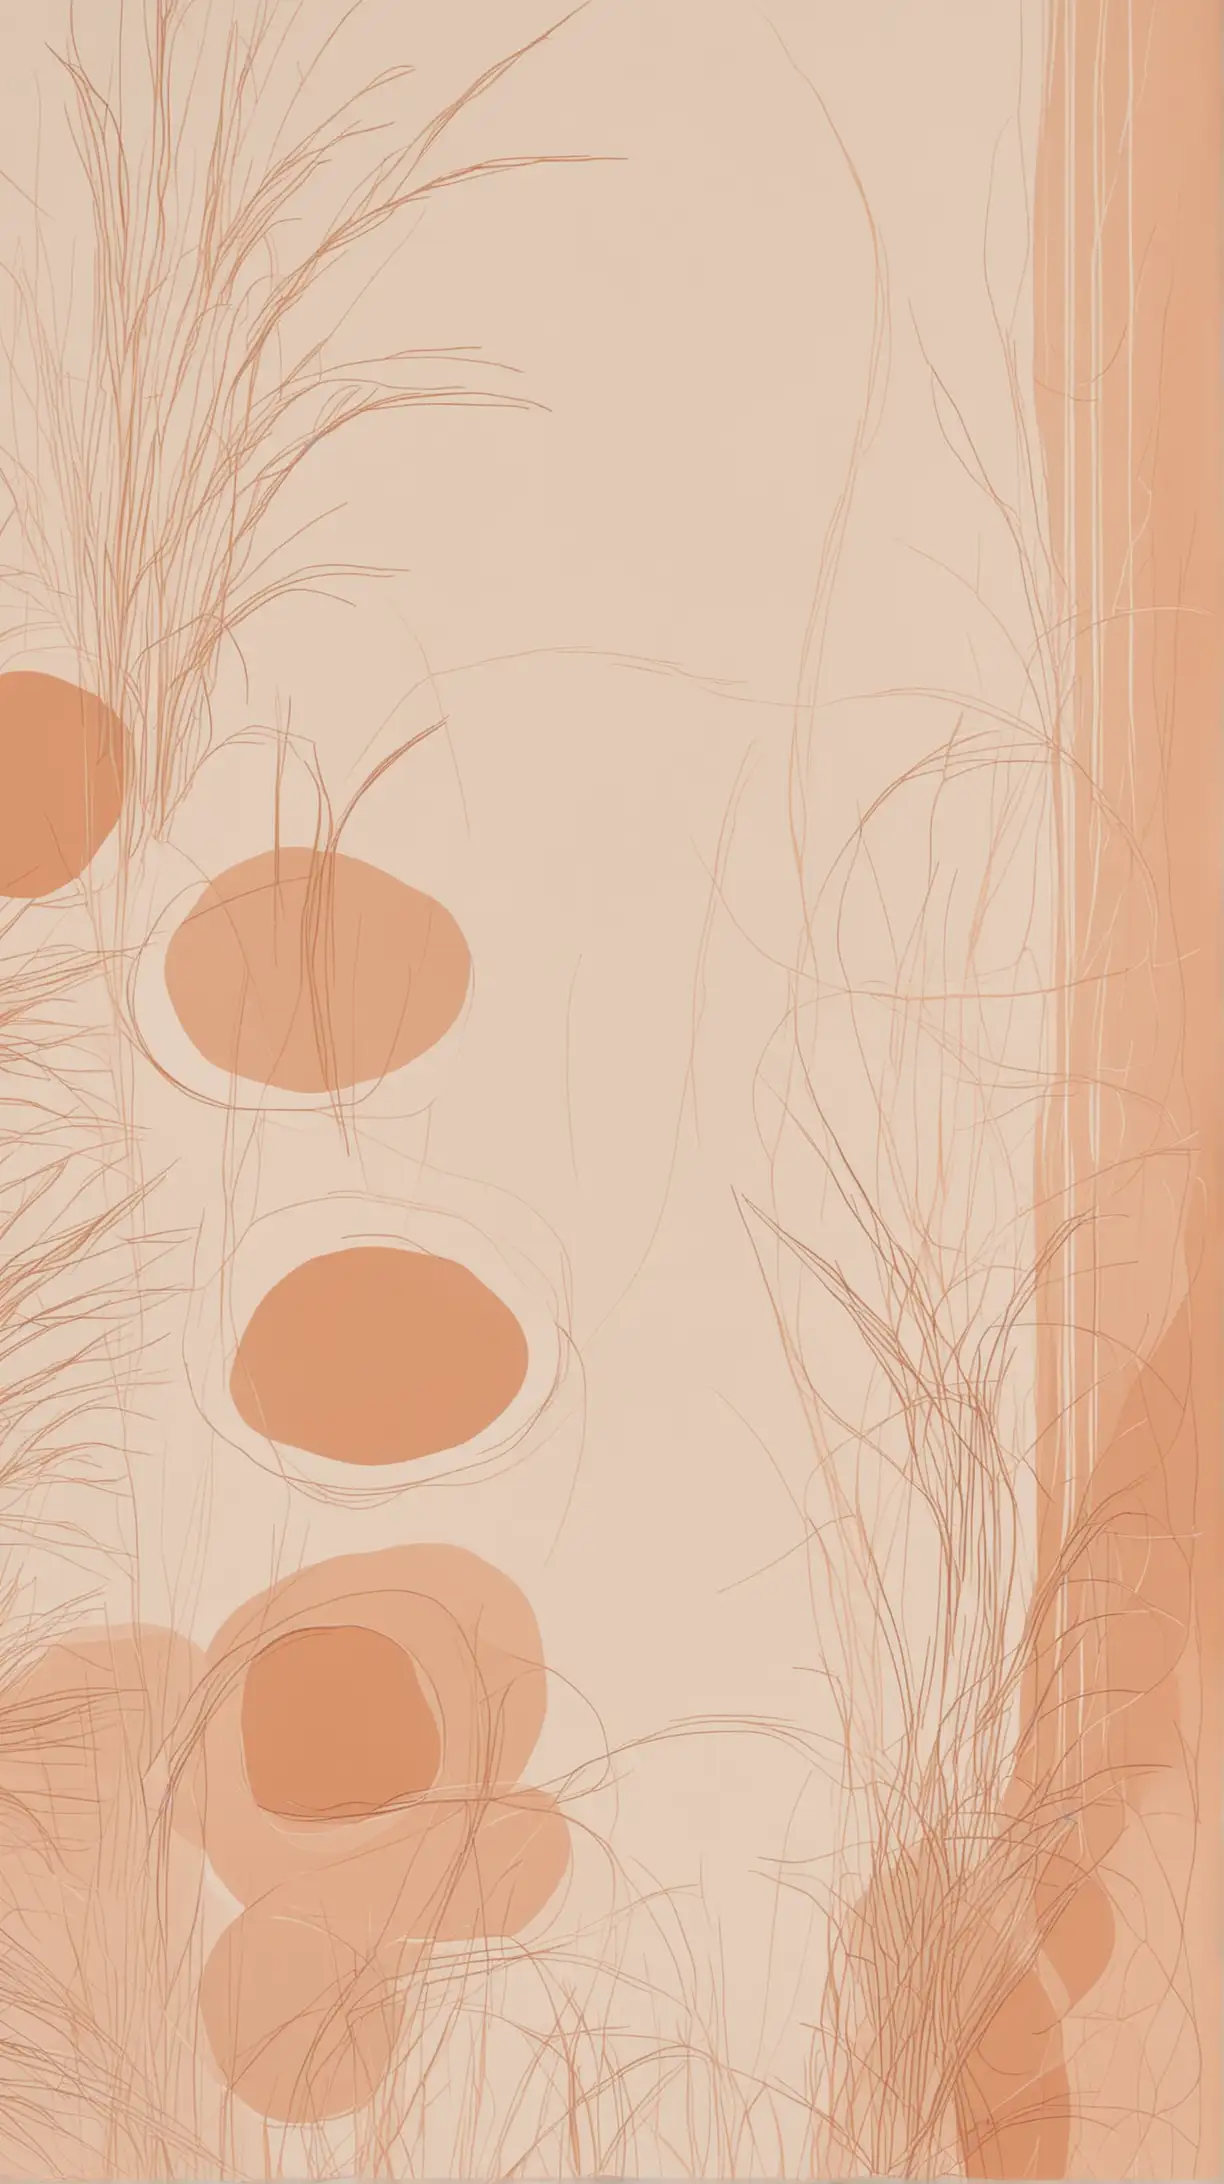 Minimal Boho, Abstract Mid-Century Modern Lineart shades of warm-toned neutral peach fuzz and beiges
